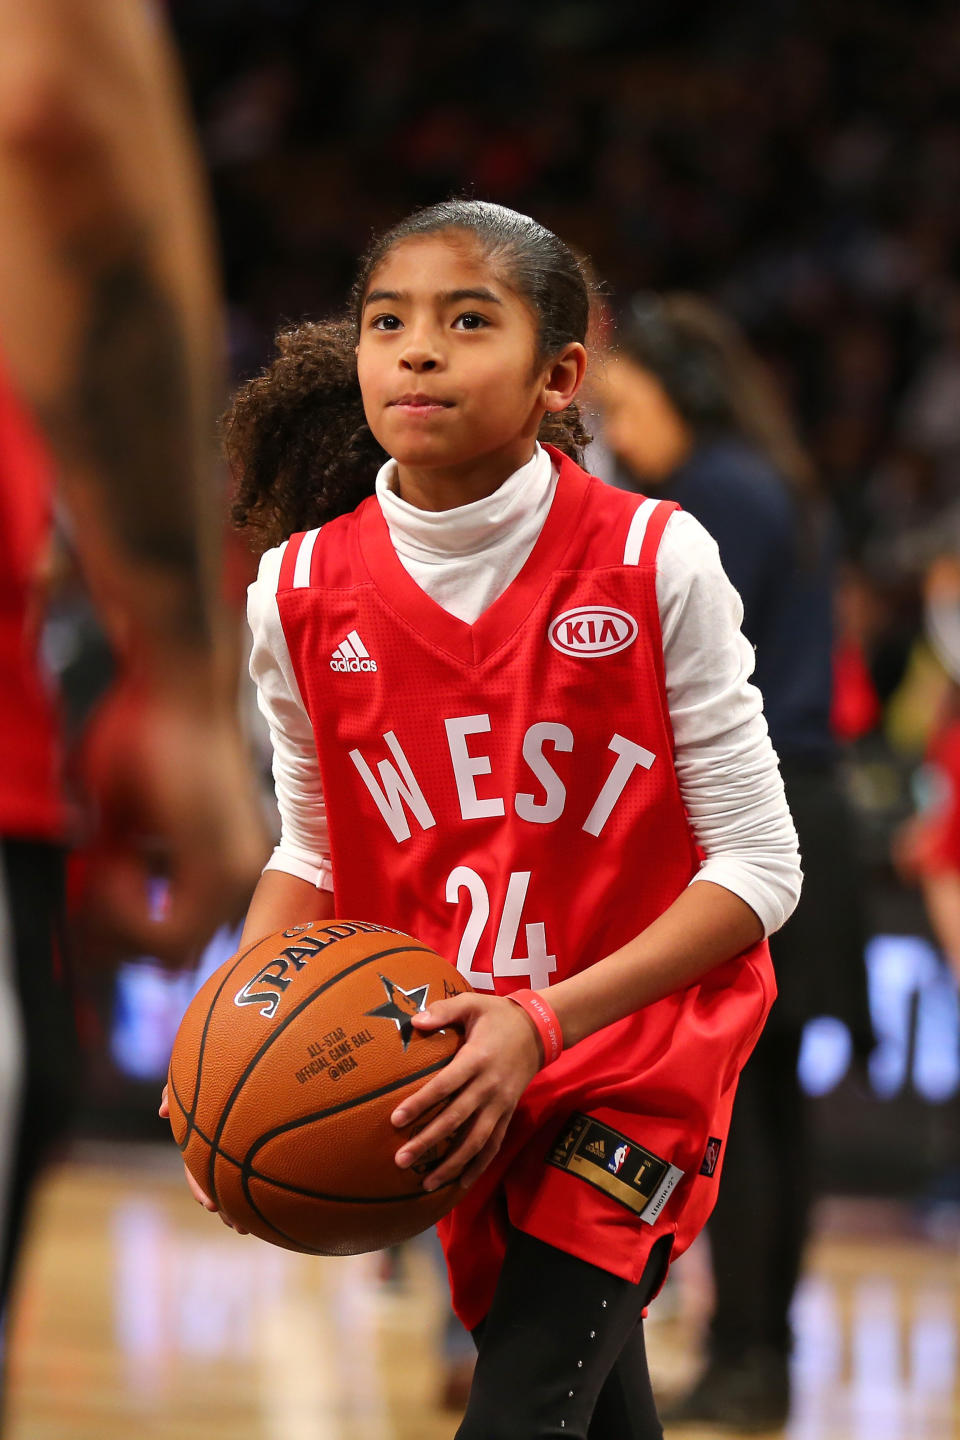 Gianna handles the ball during warmups before the game. (Photo: Elsa via Getty Images)